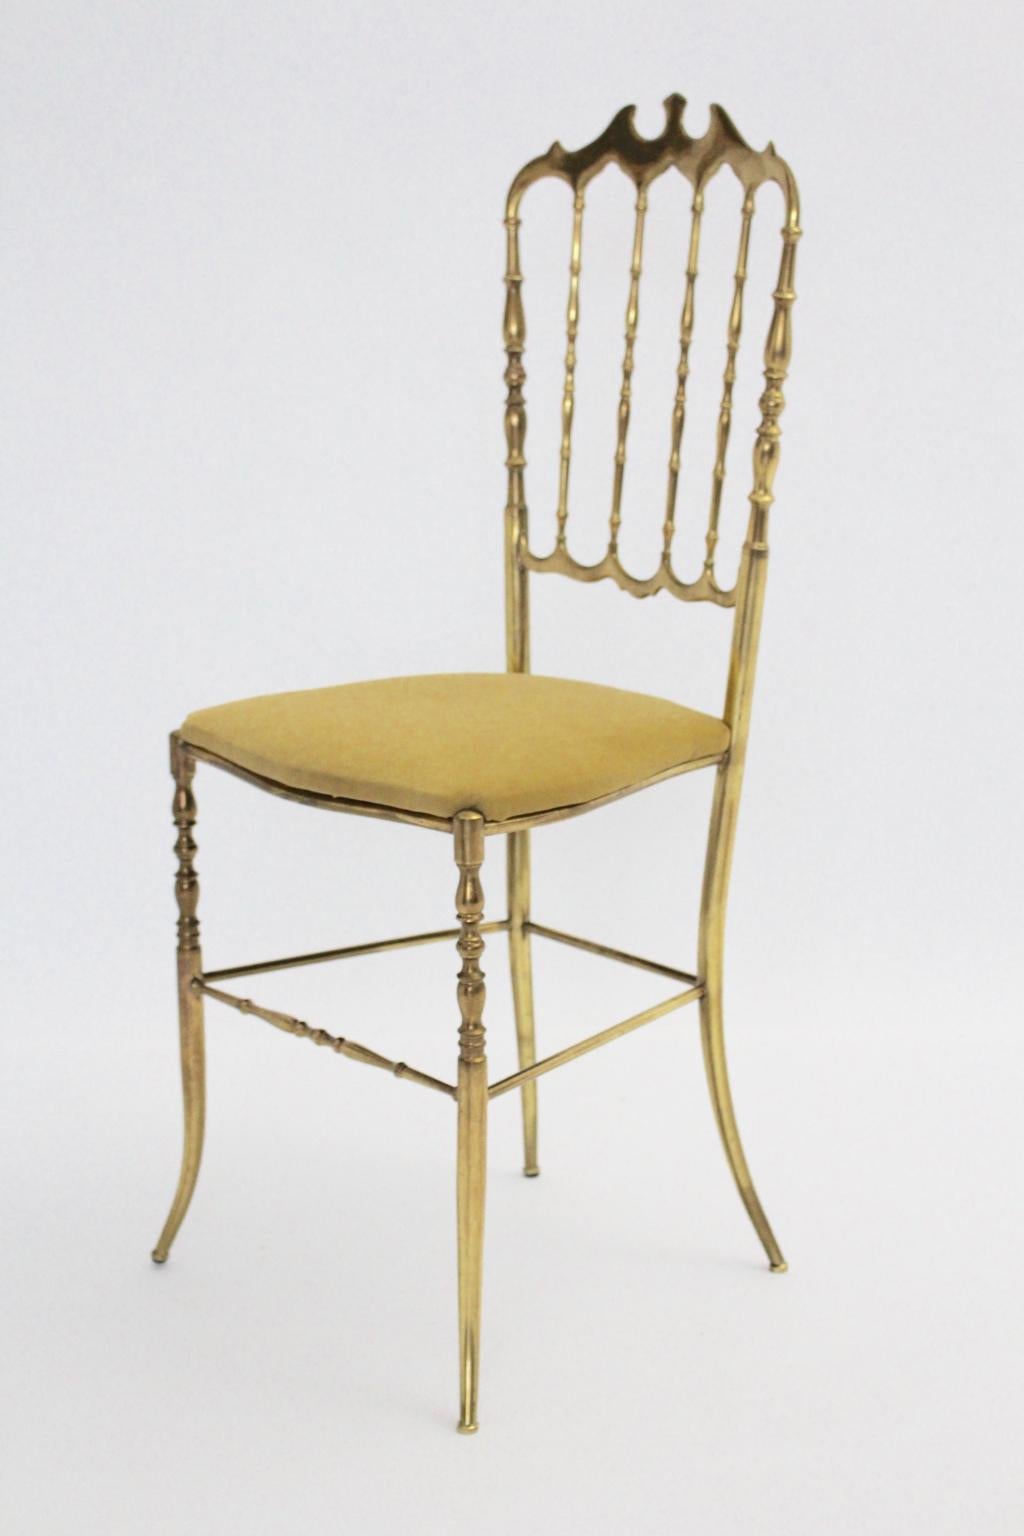 Mid Century Modern Vintage Chiavari side chair from brass with renewed yellow velvet fabric seat.
This wonderful side chair or chair Chiavari shows a beautiful brass patina as a desirable signs of age, while the upholstered seat is covered with new